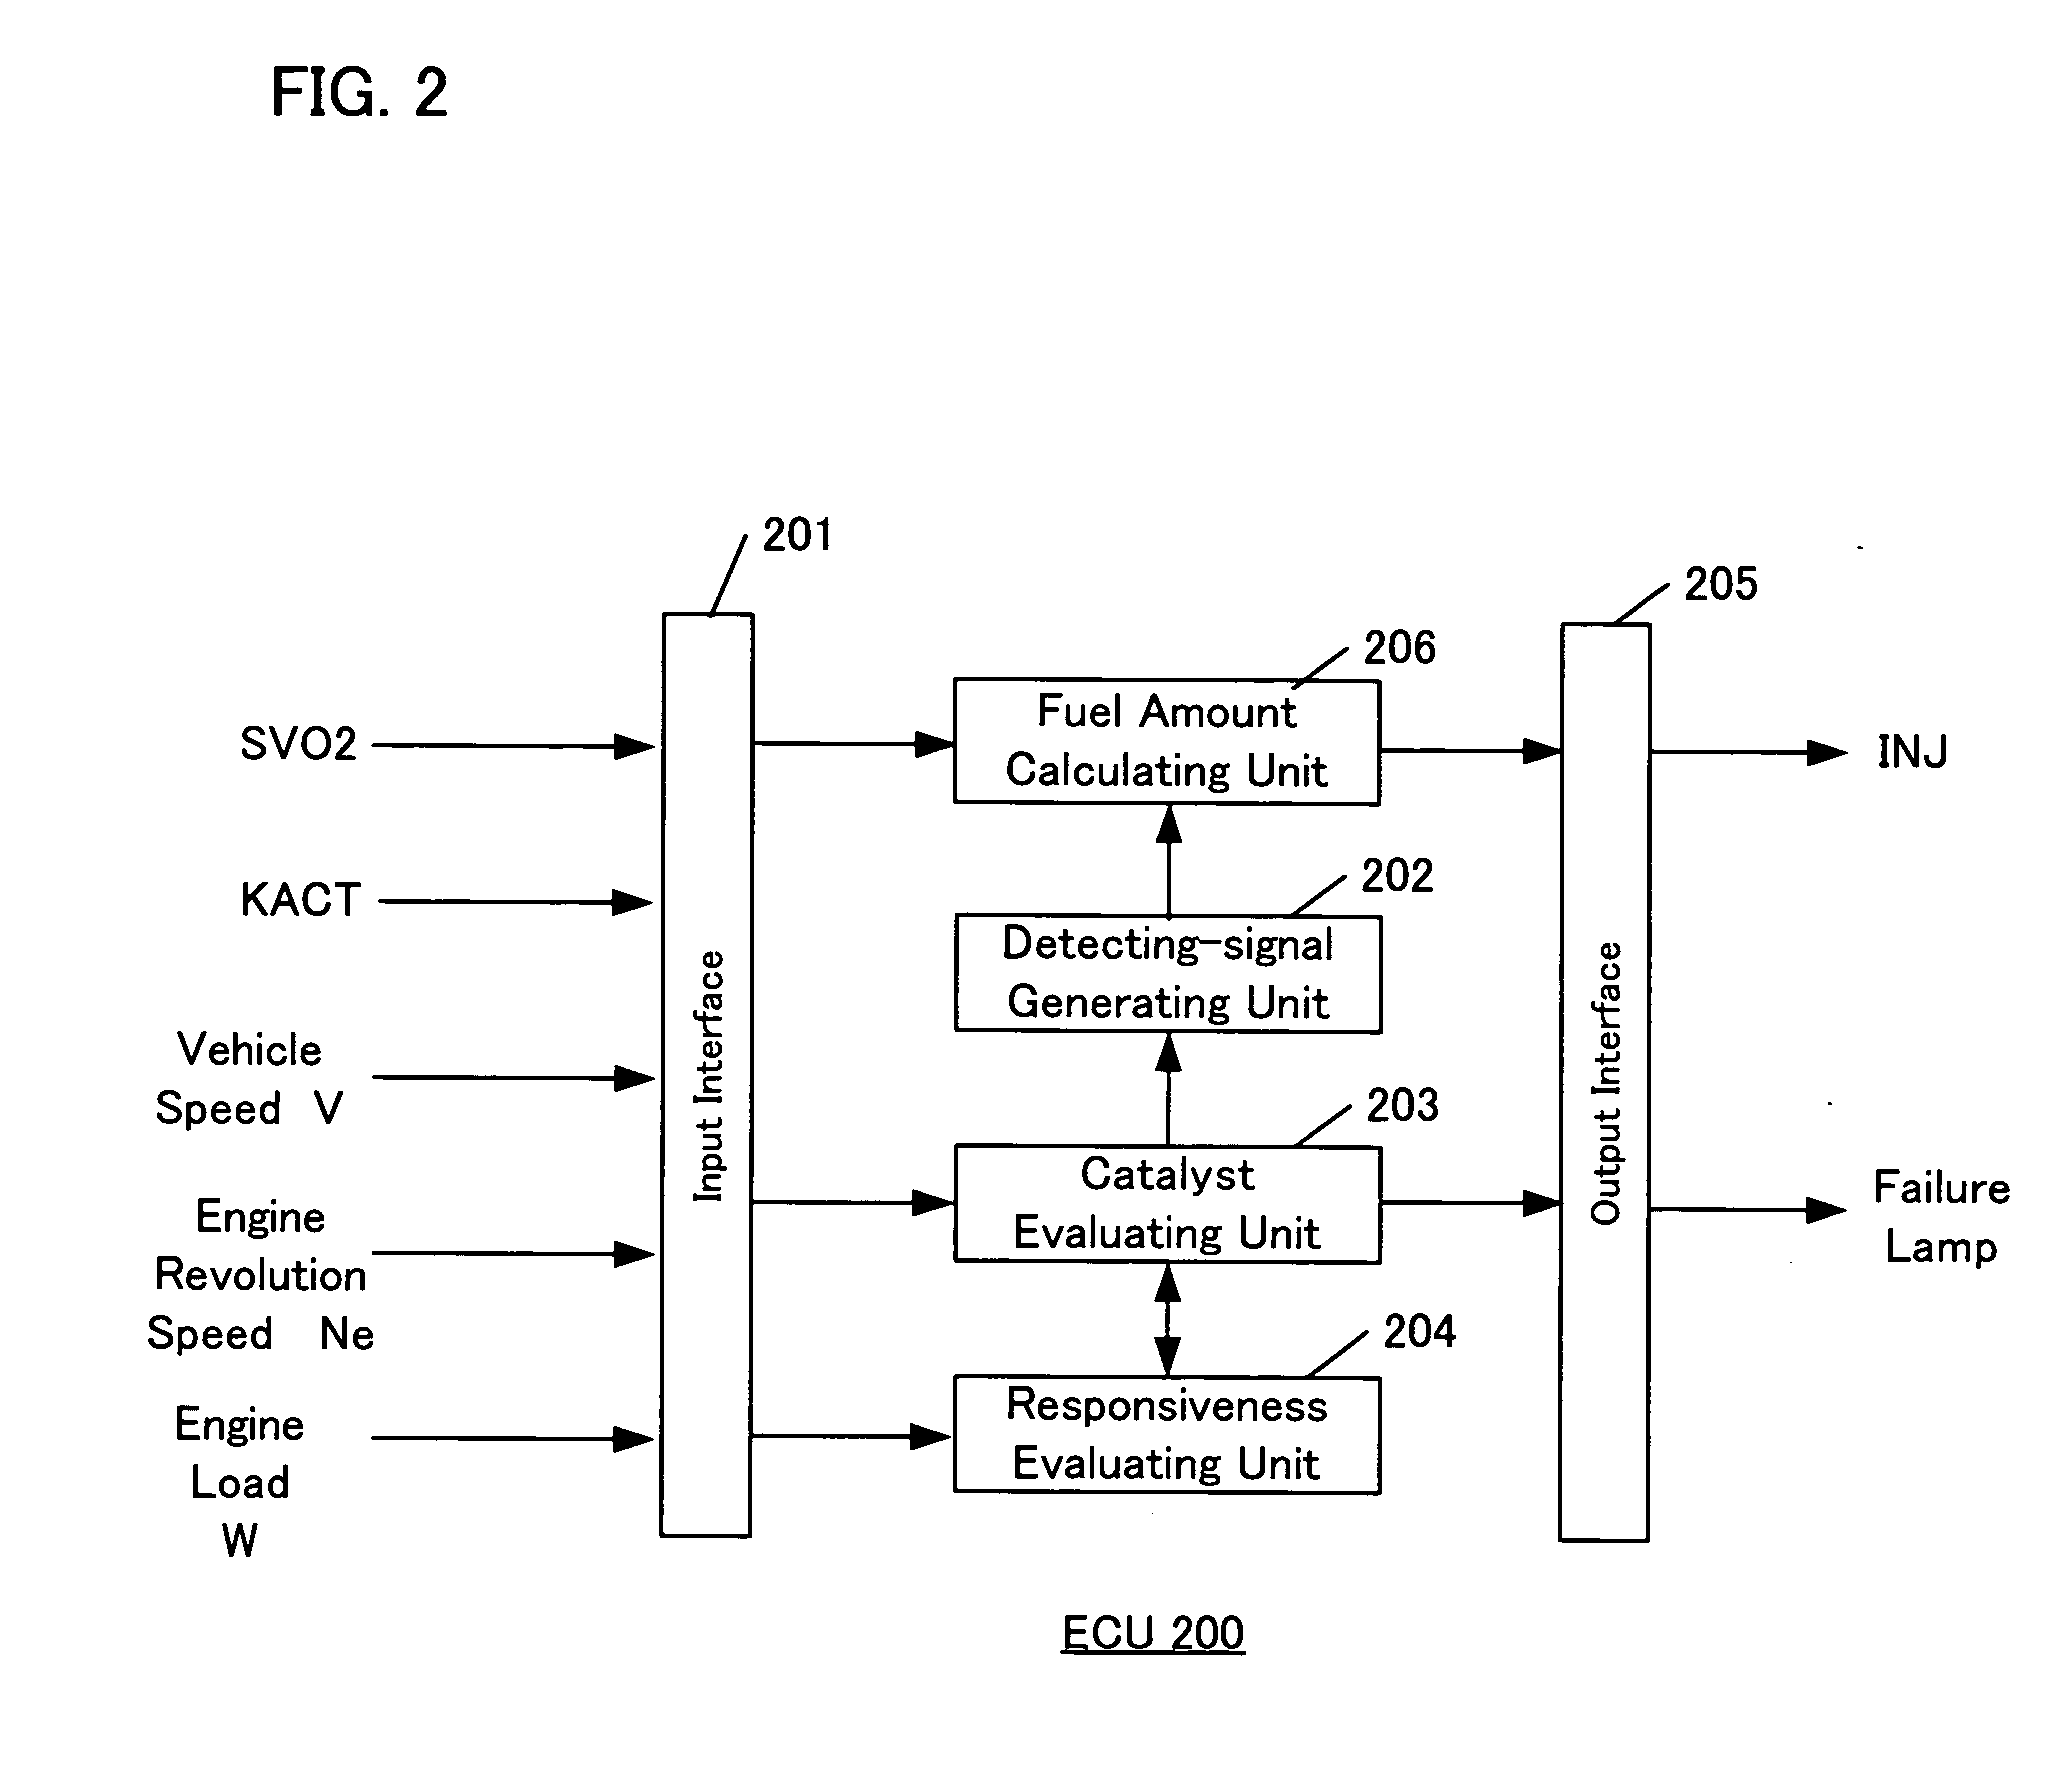 Deterioration diagnostic device for an exhaust gas purifier